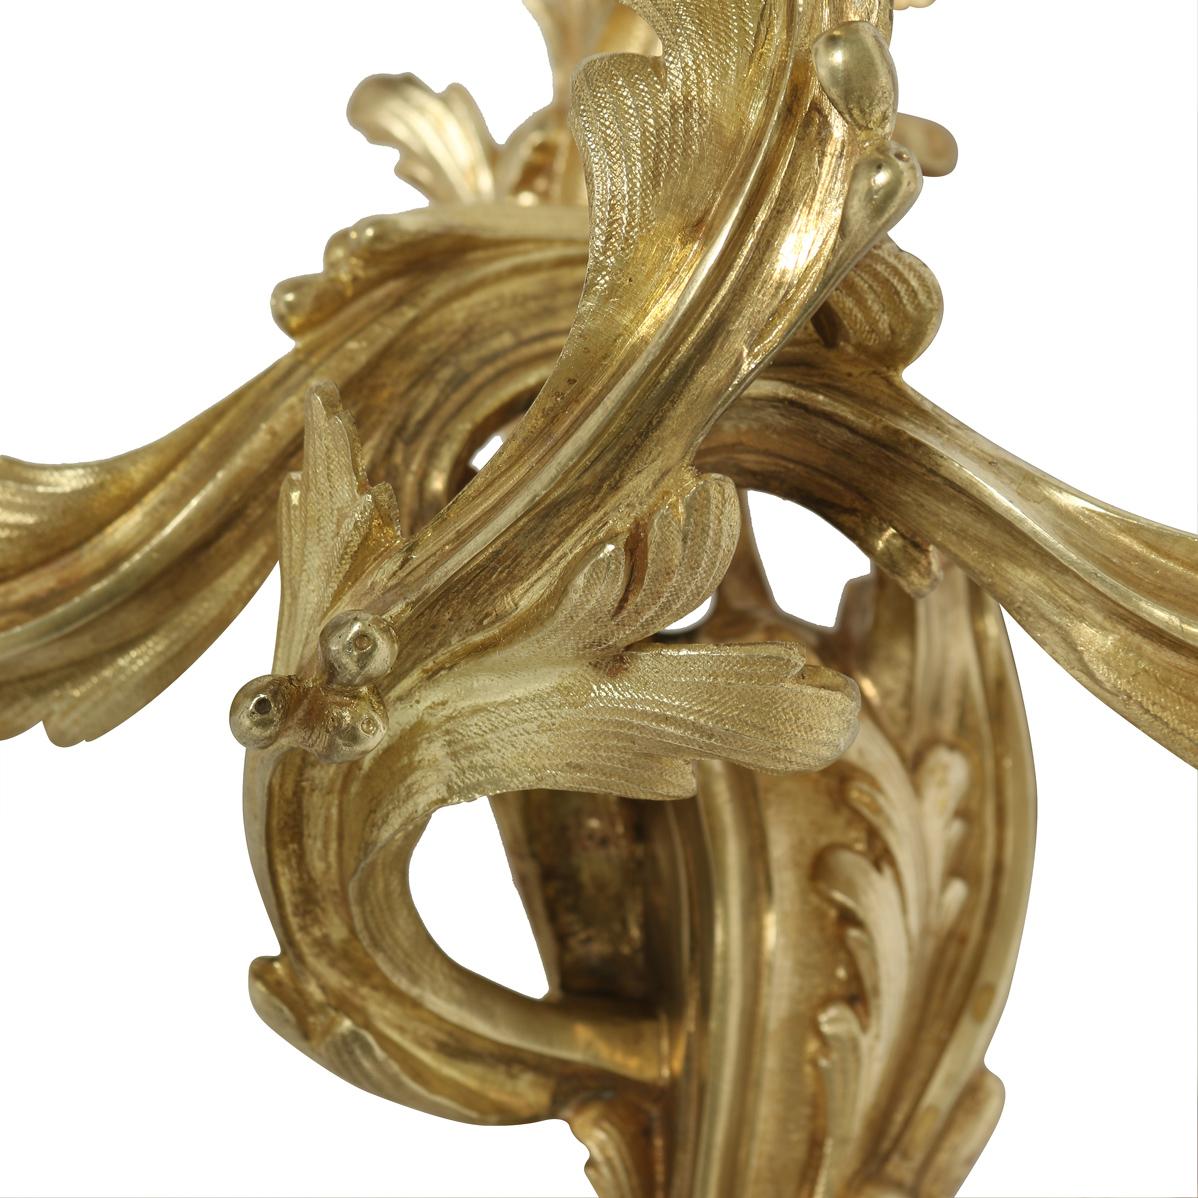 Set of five gilt bronze, three arm sconces in Louis XV style. Elegant addition to a space.